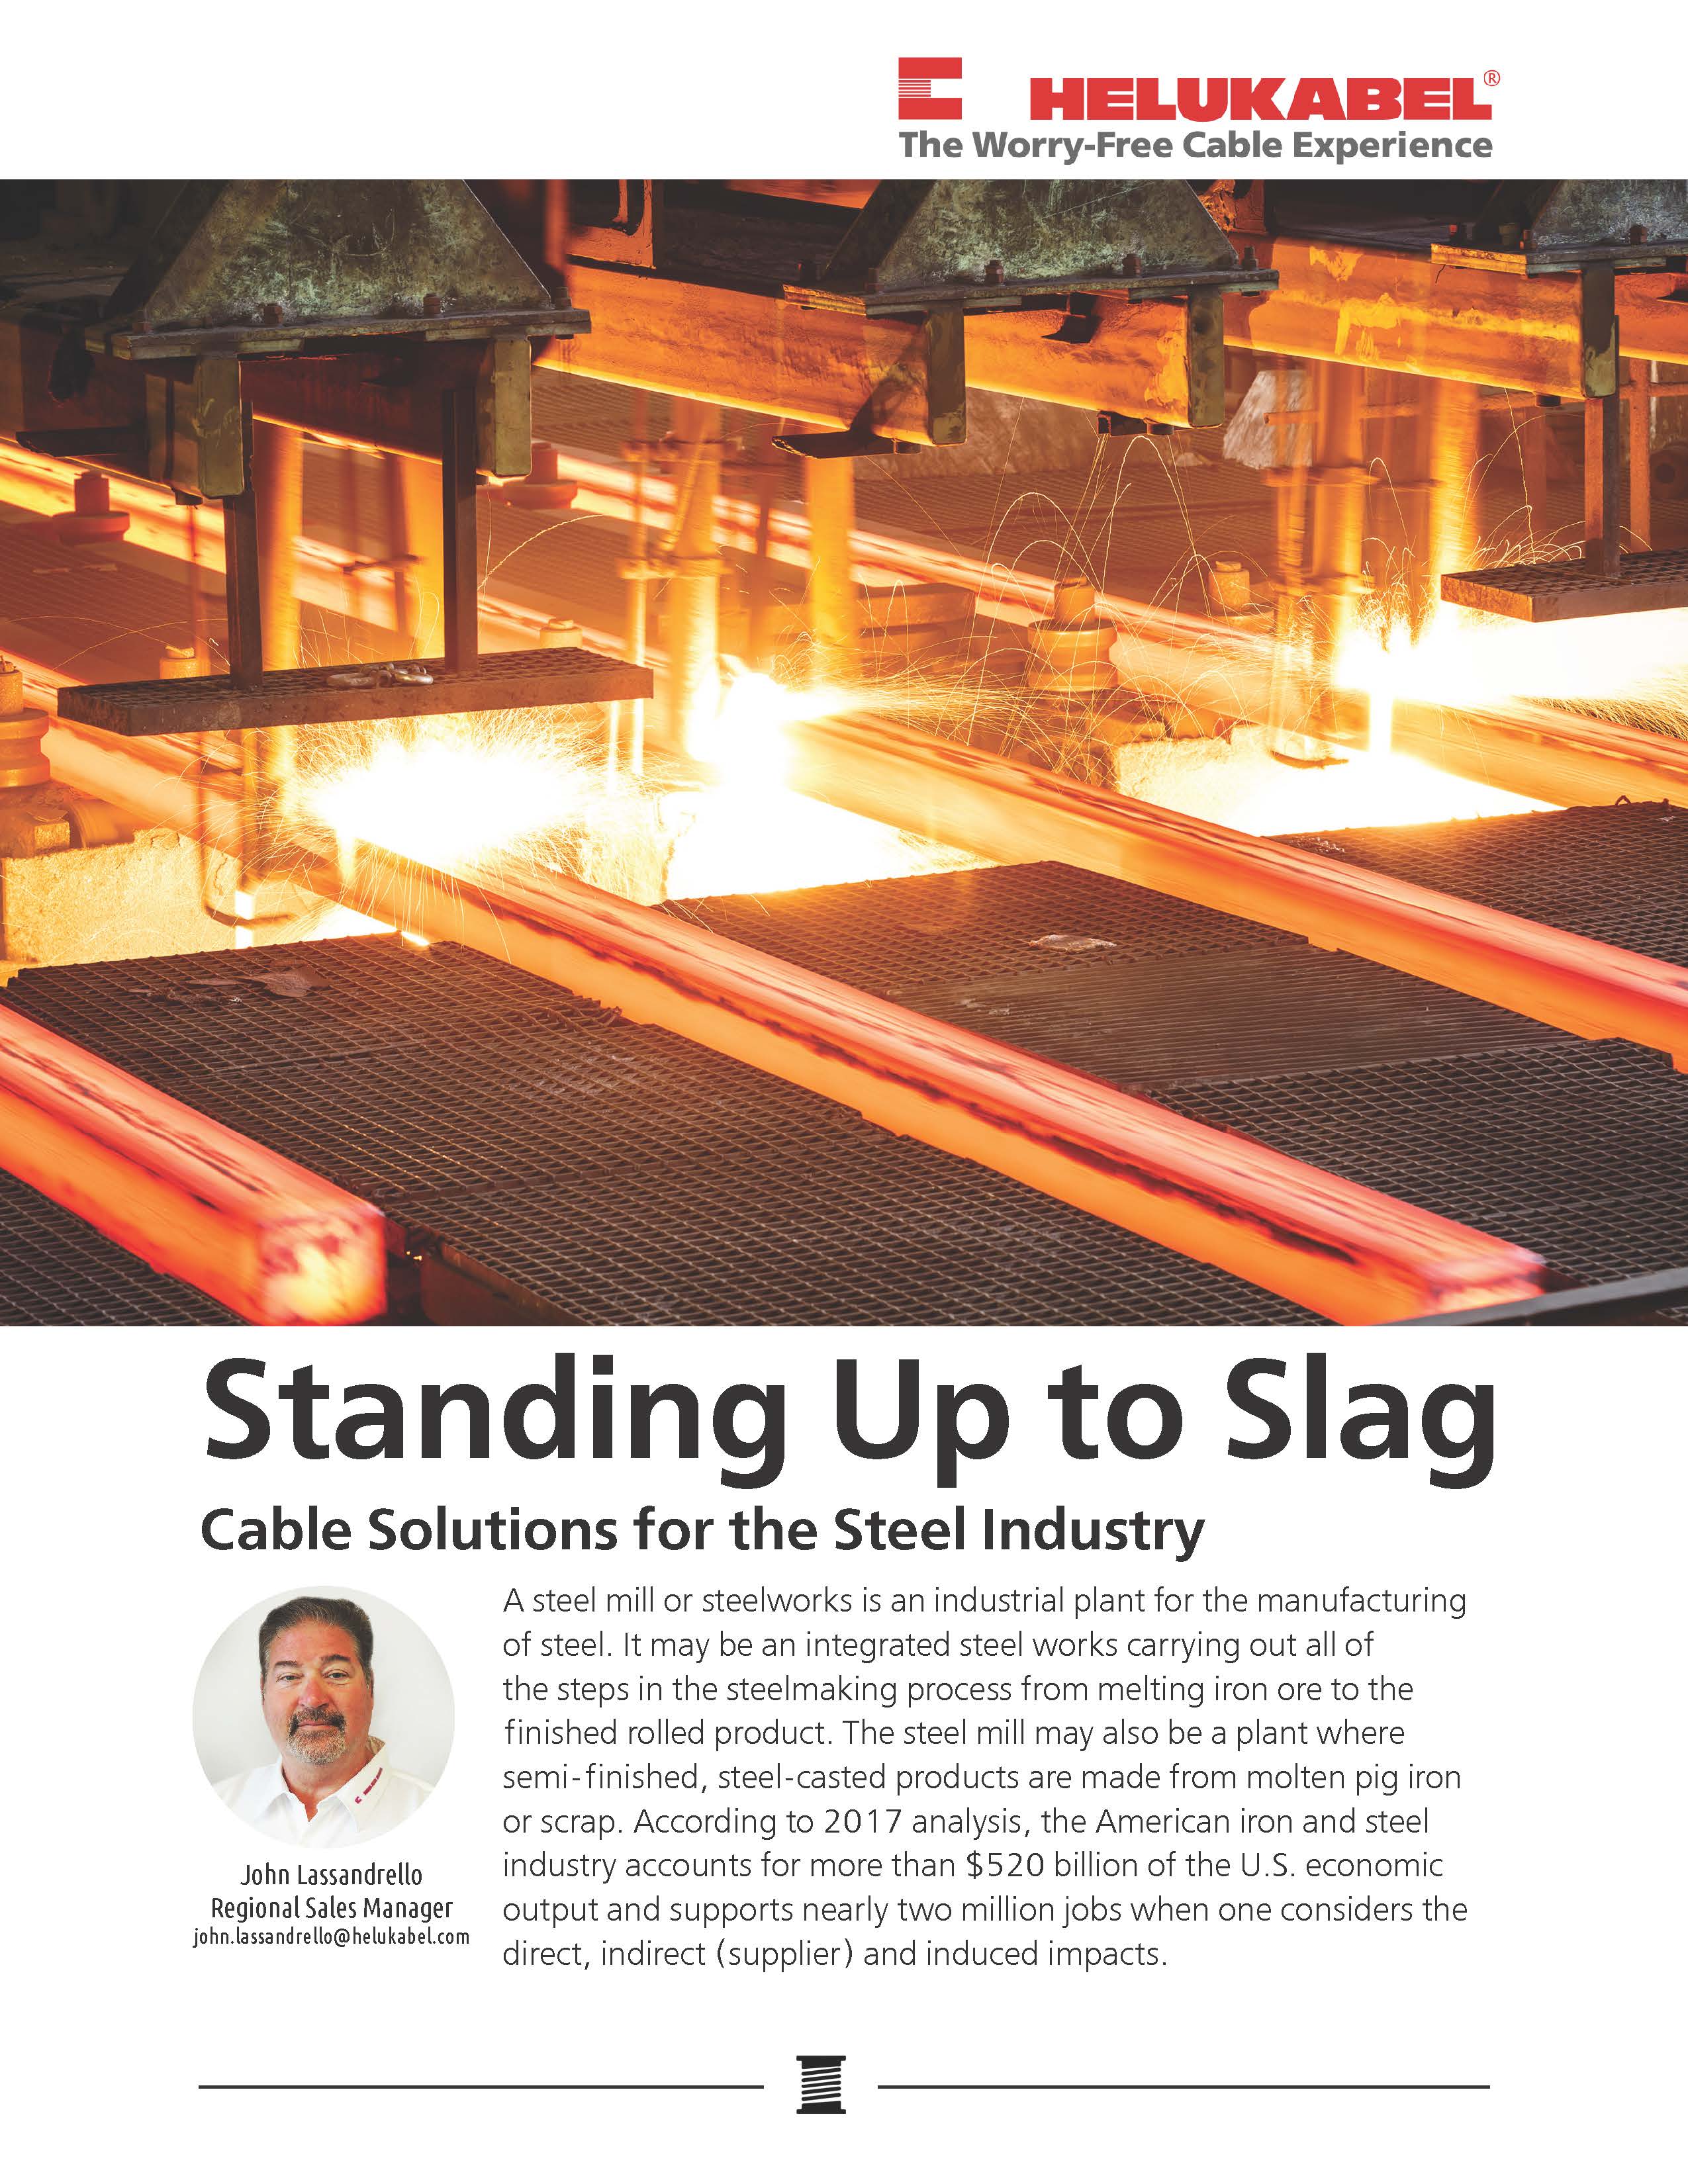 Standing Up to Slag: Cable Solutions for the Steel Industry